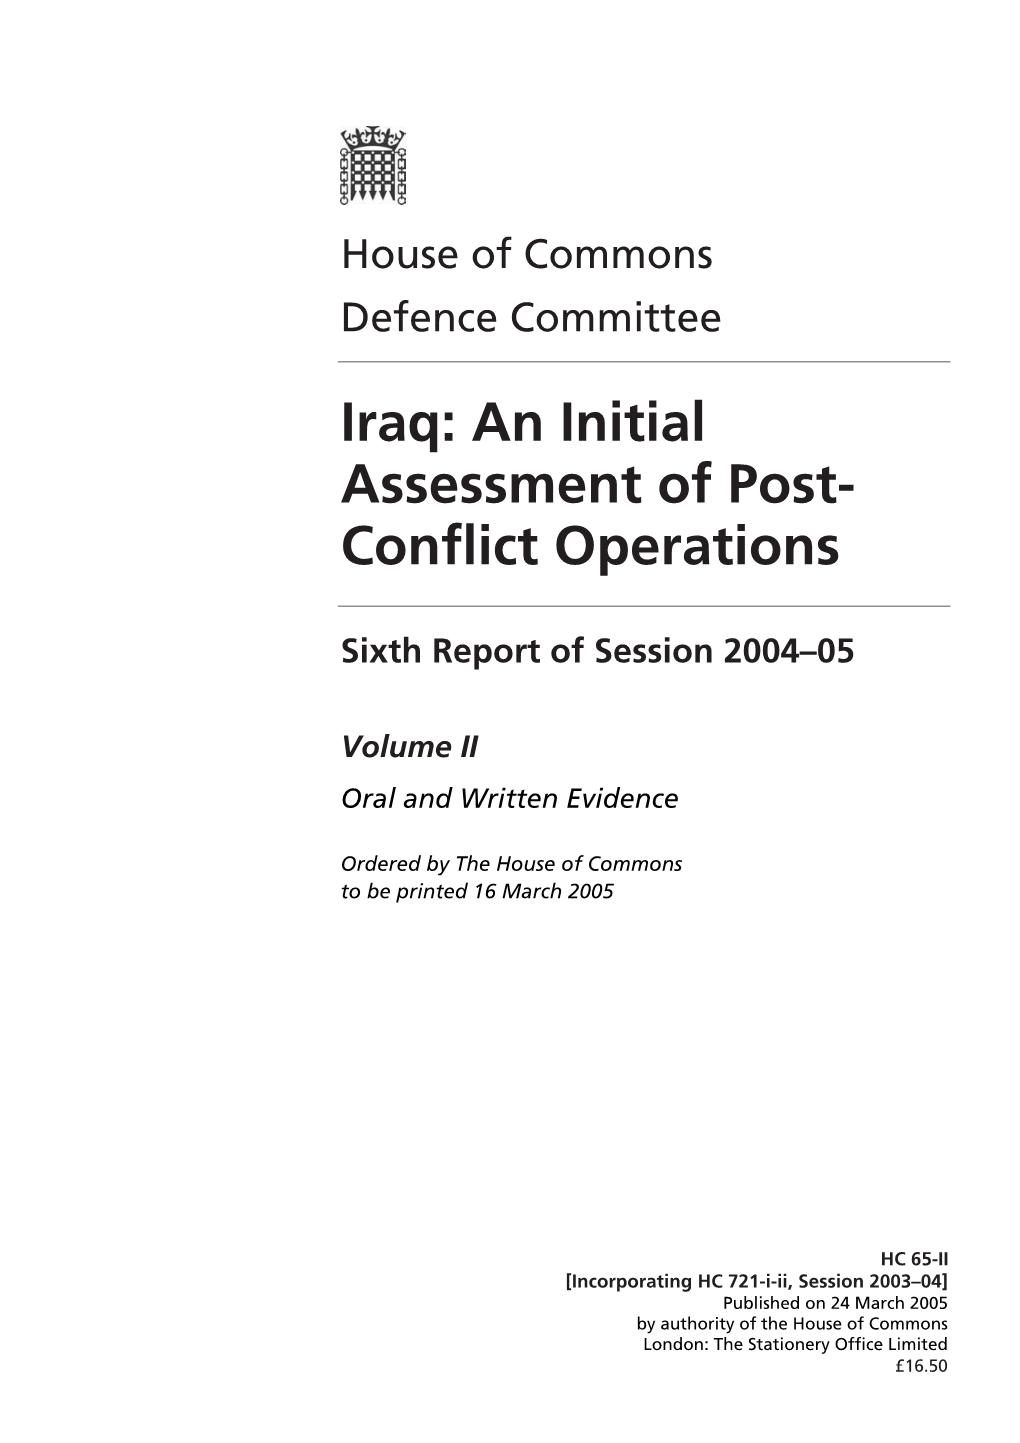 Iraq: an Initial Assessment of Post- Conflict Operations